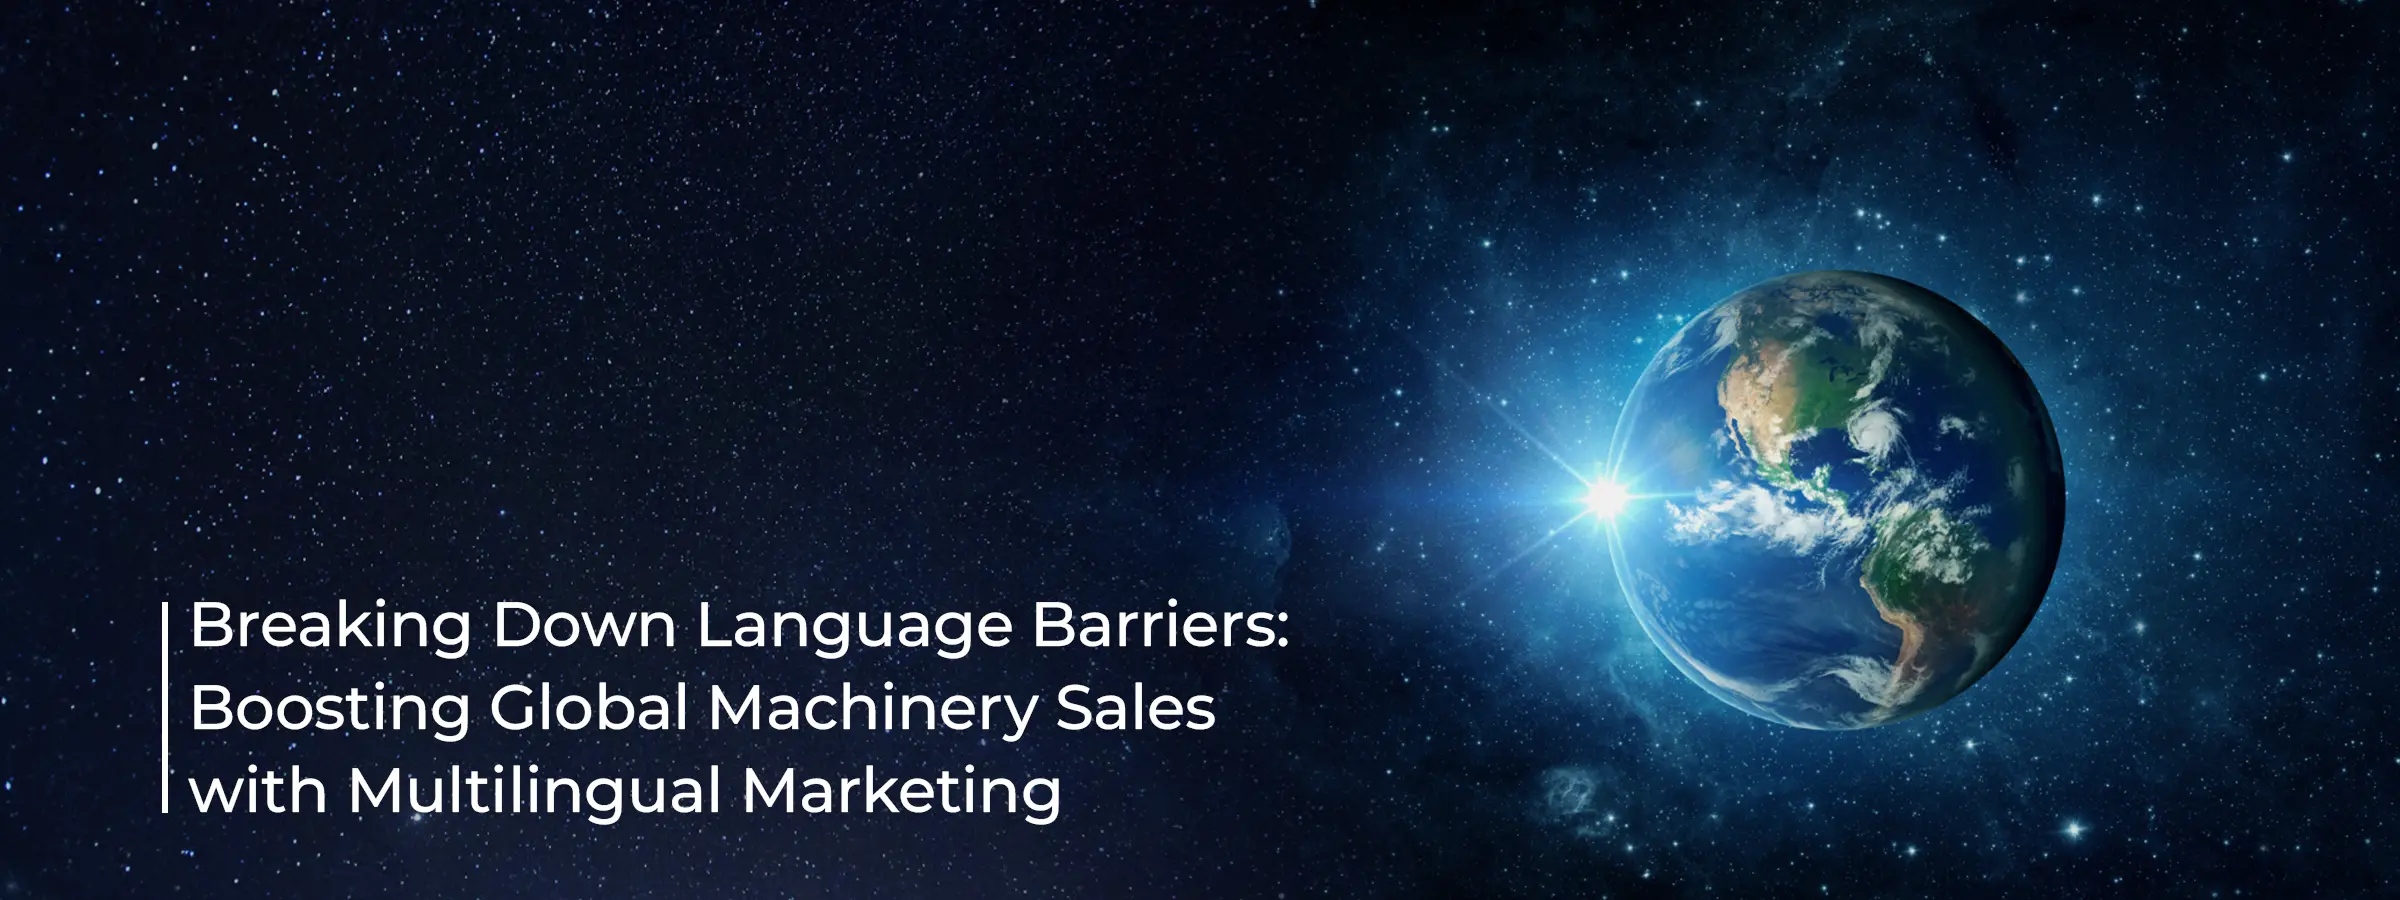 breaking-down-language-barriers-boosting-global-machinery-sales-with-multilingual-marketing